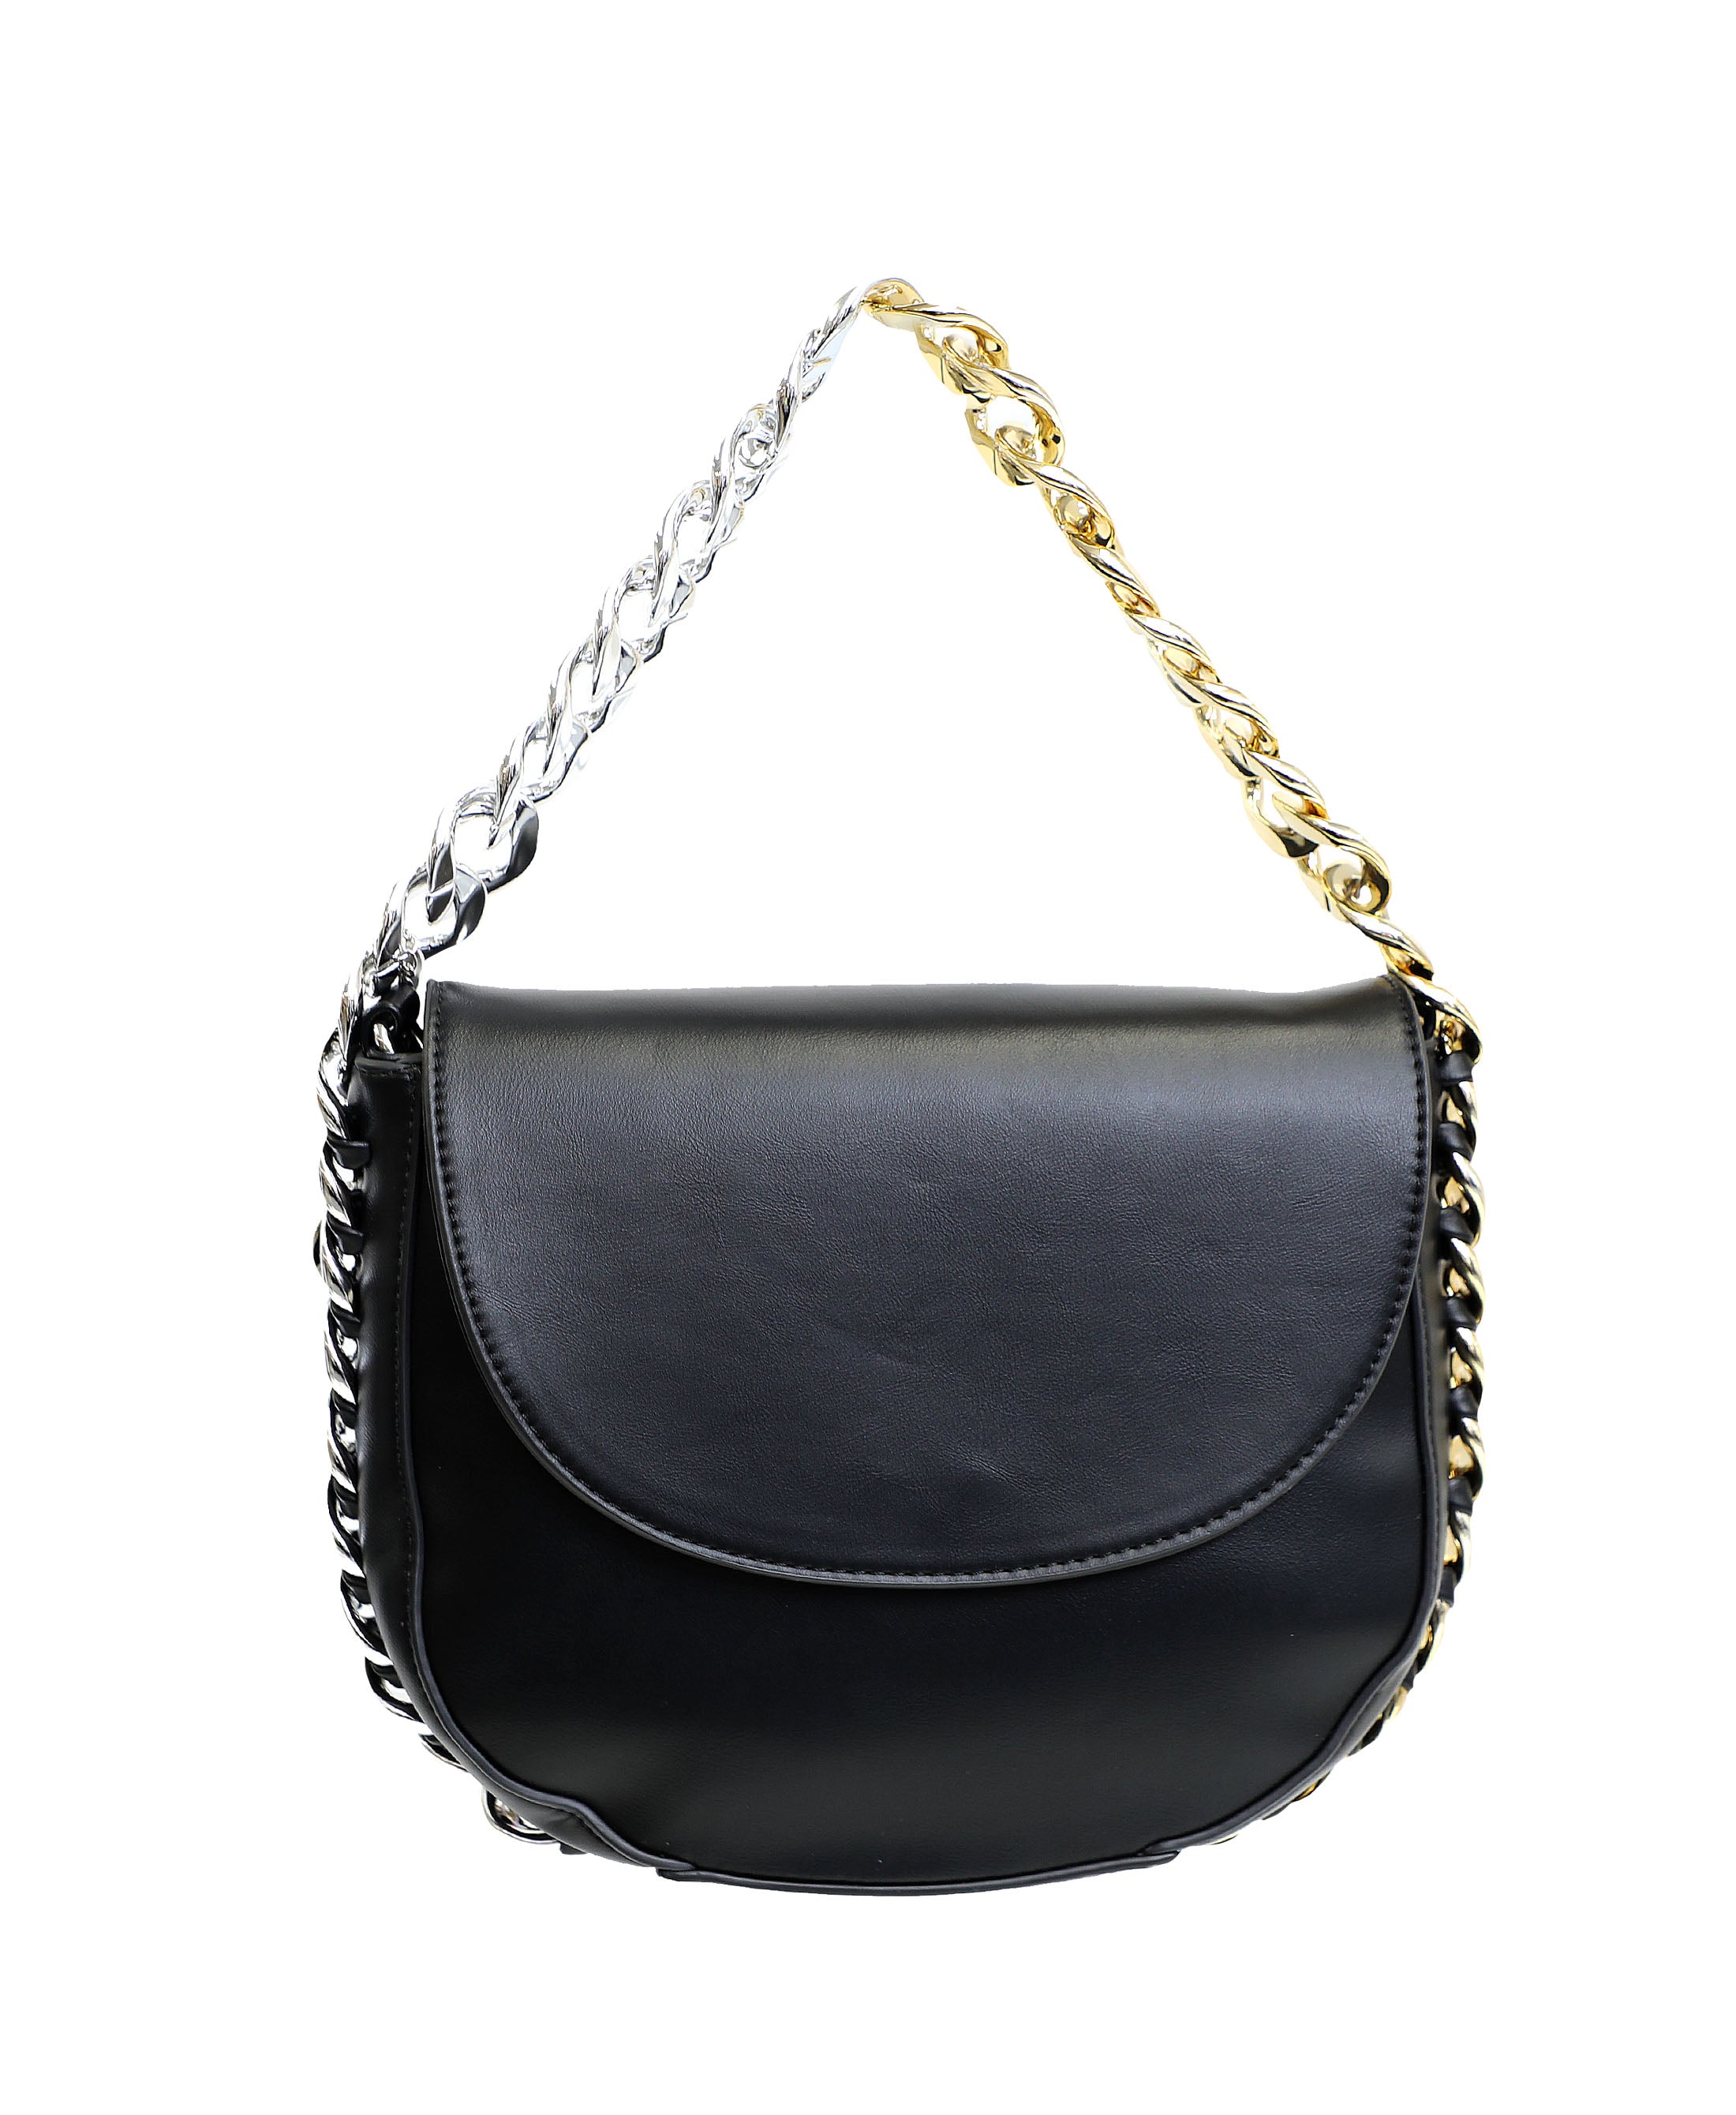 Ashrykins half moon with thick chain Details cross body bag in Black